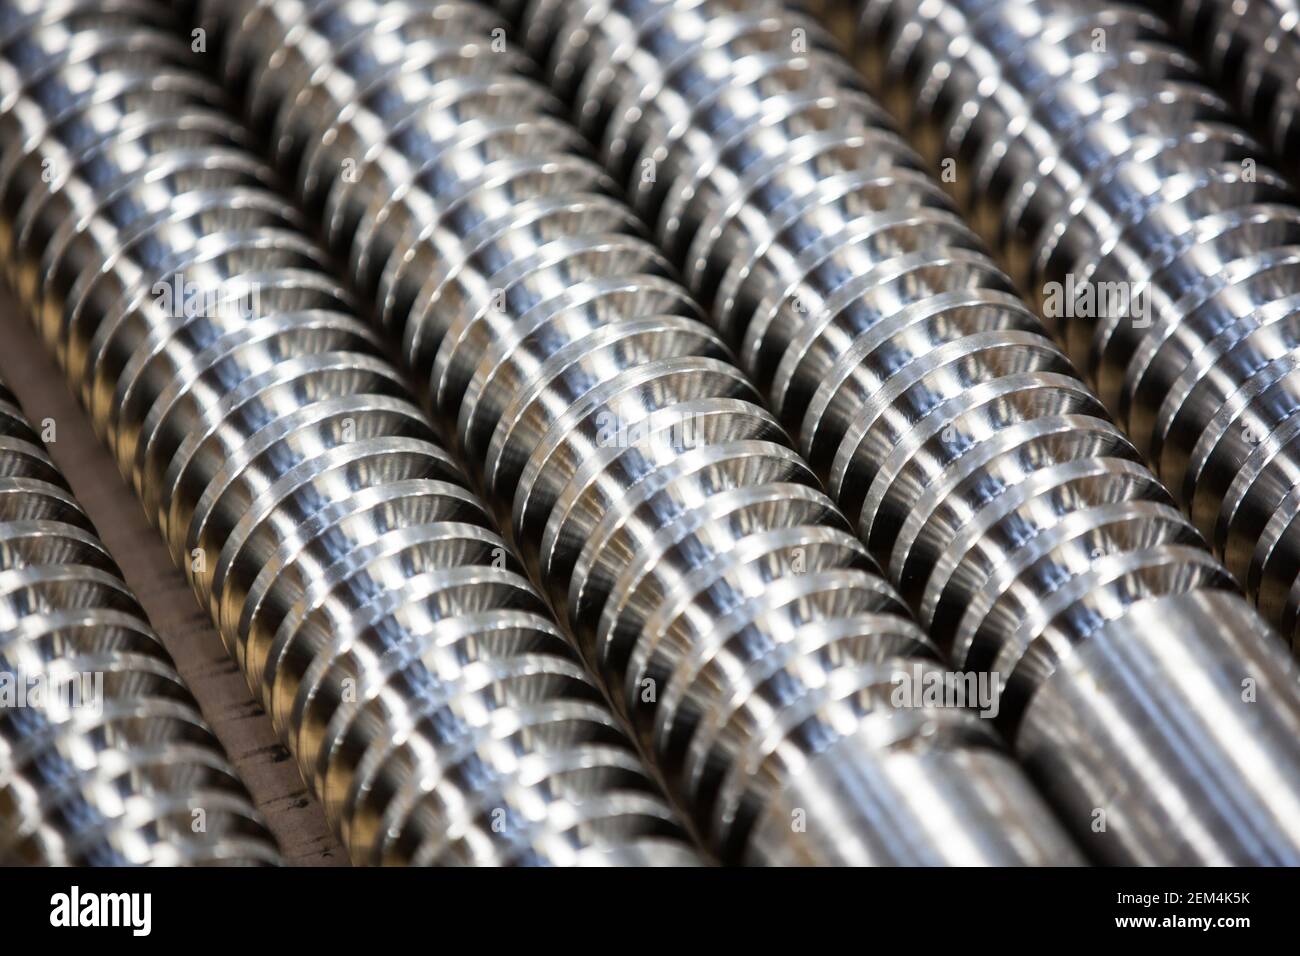 Screw threads on clean and new silver steel rods Stock Photo